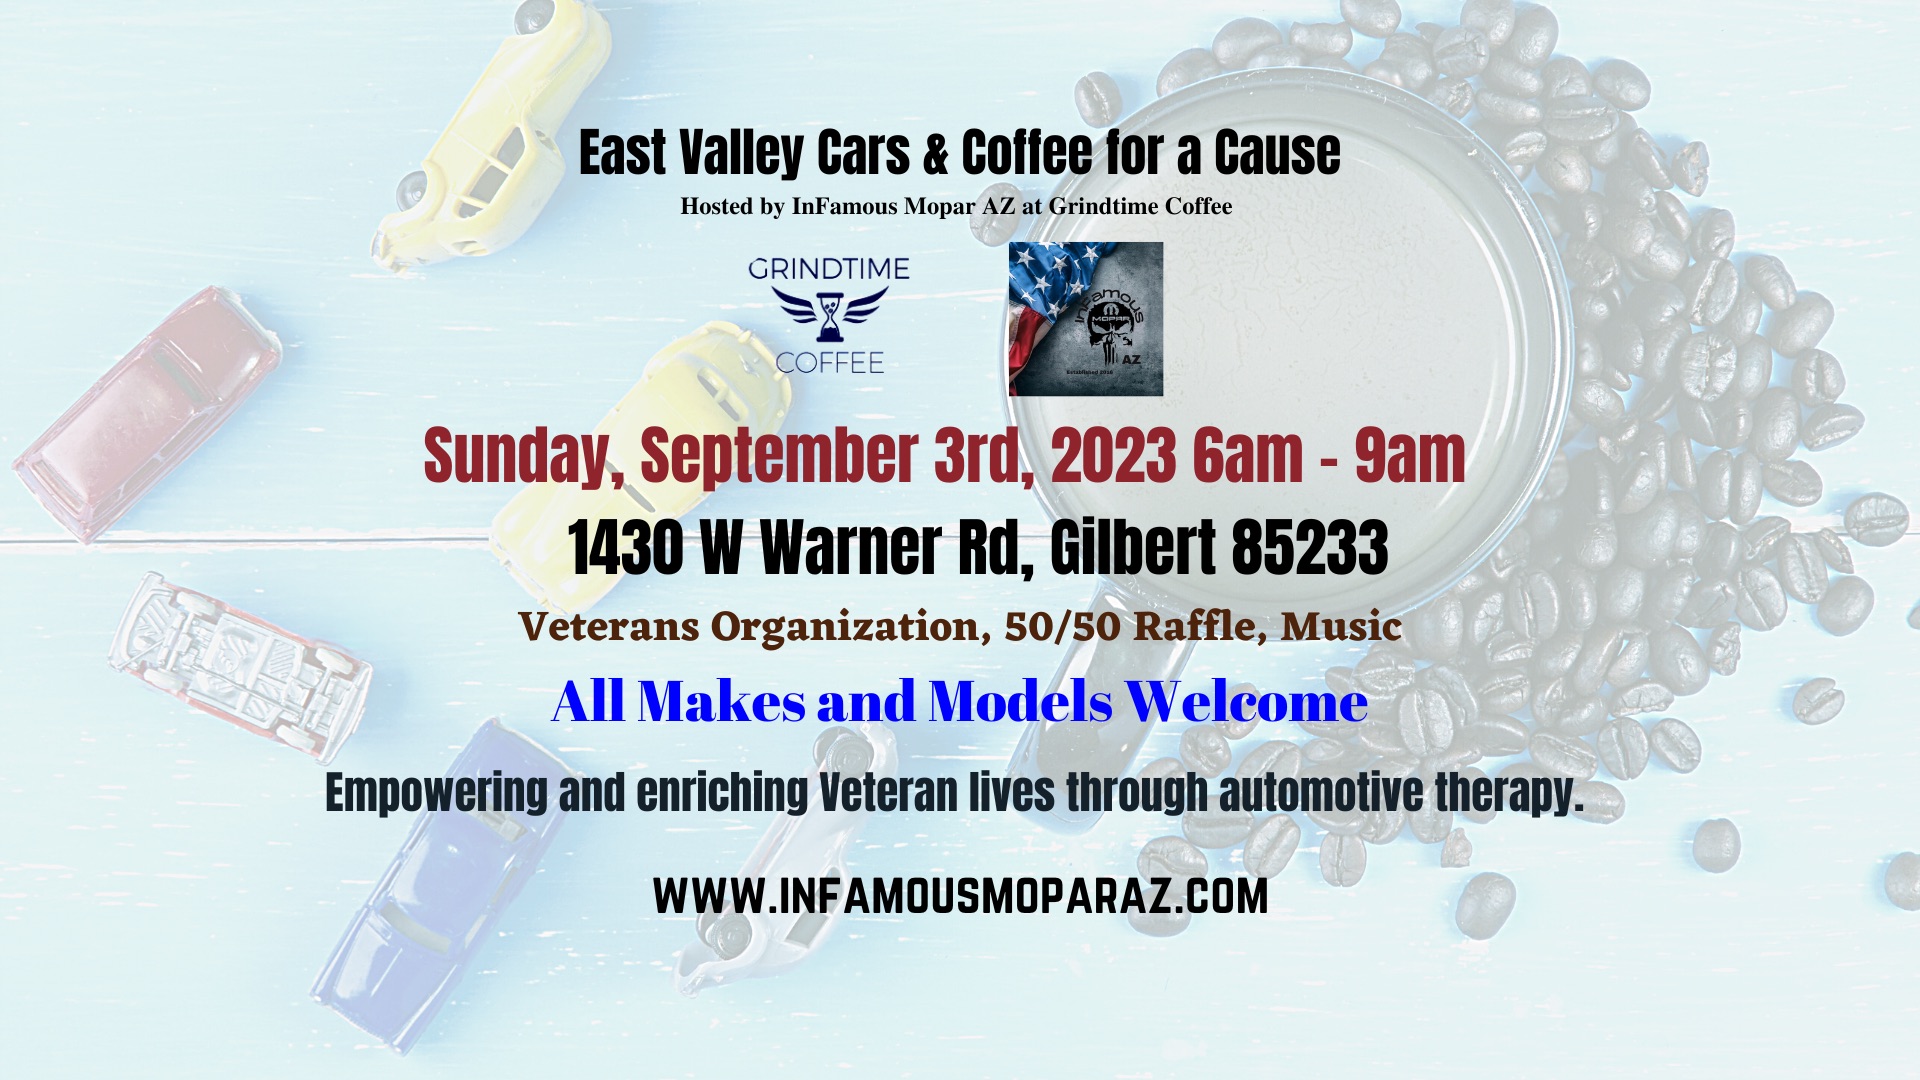 East Valley Cars & Coffee for a Cause